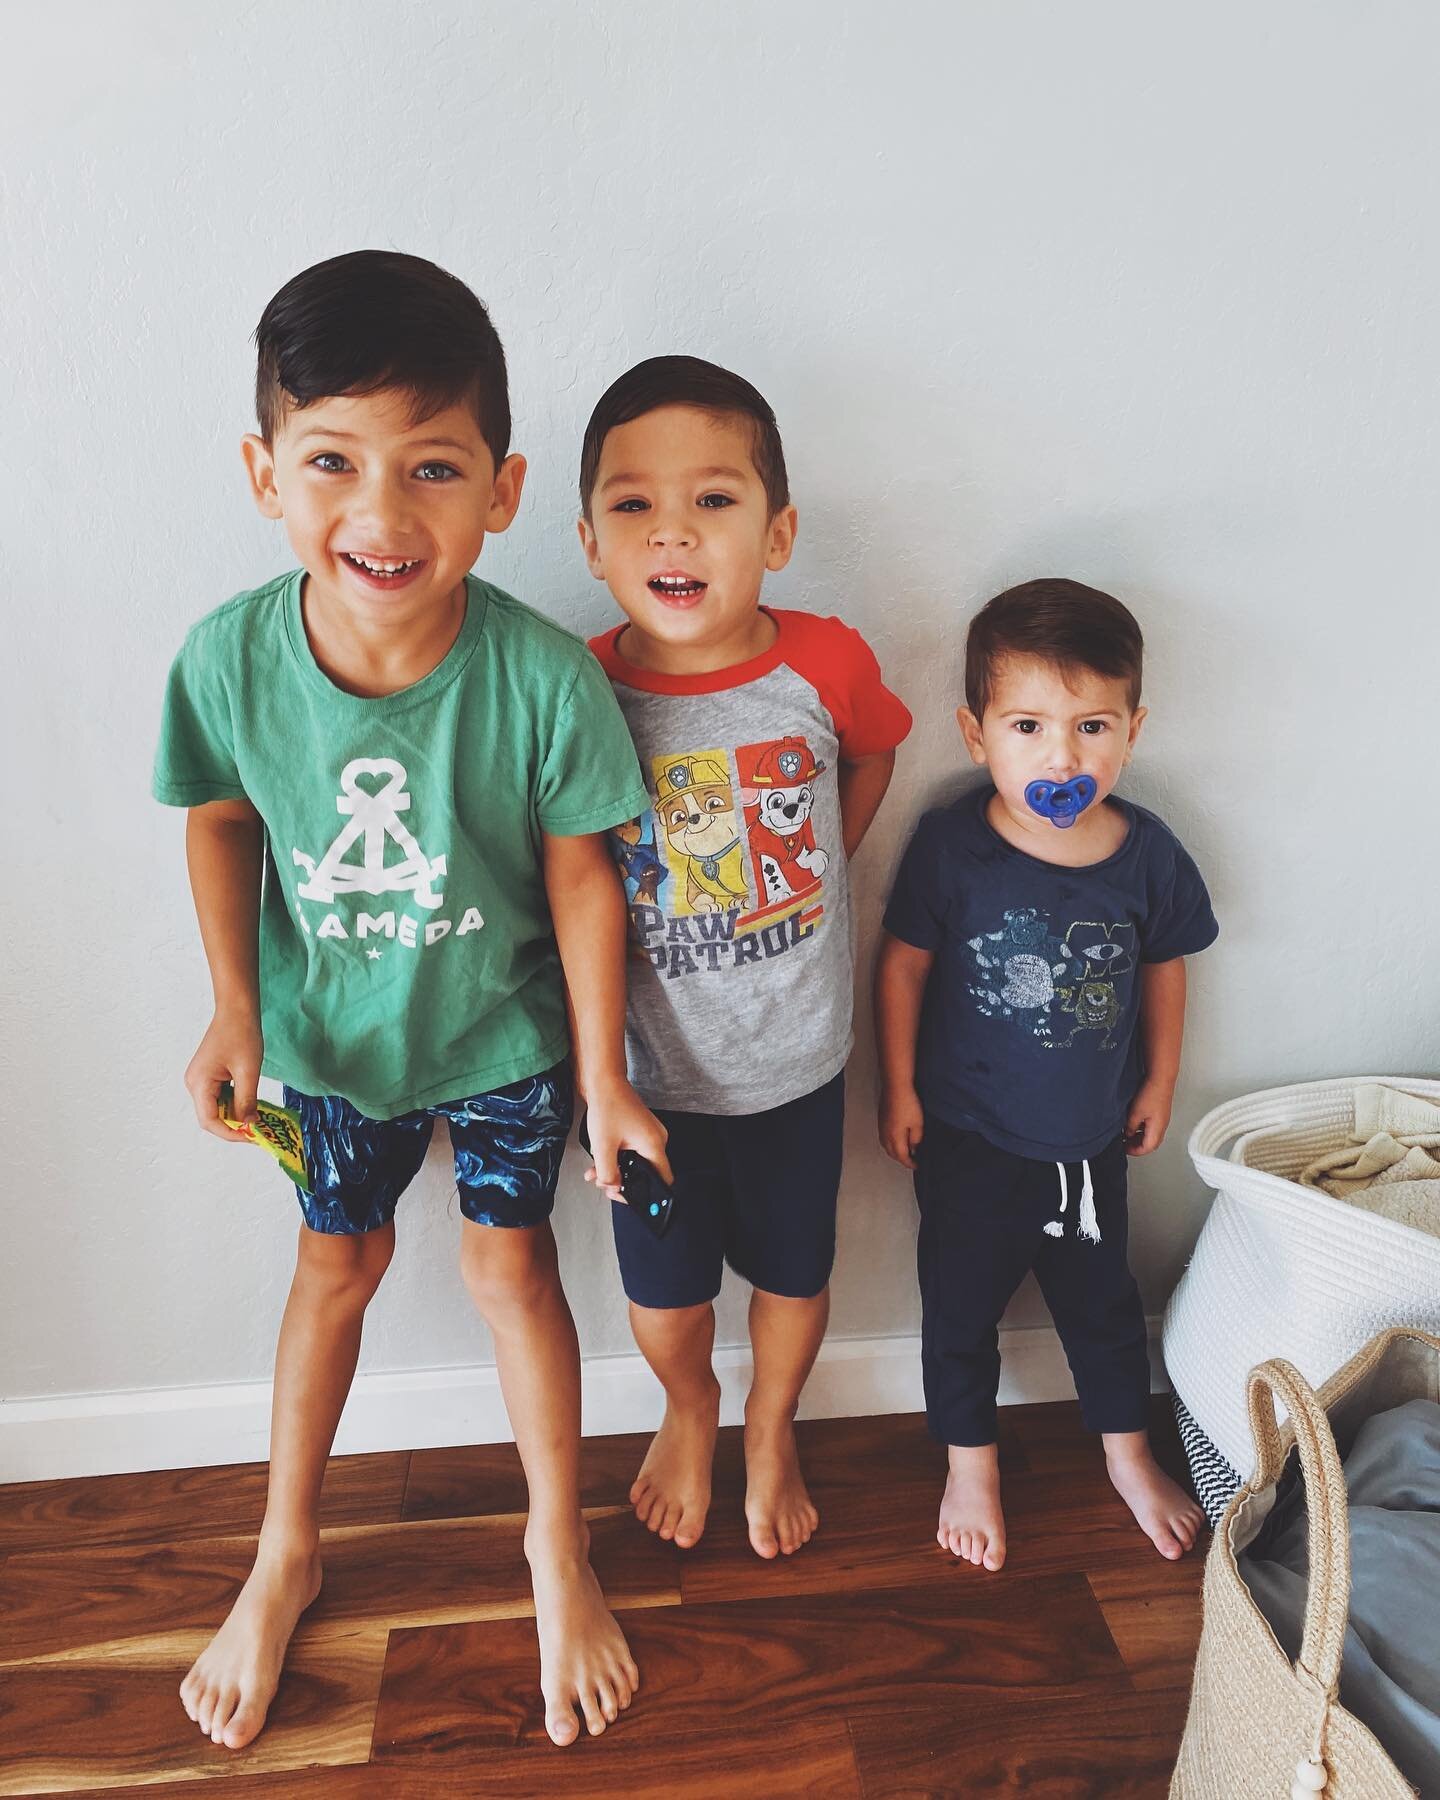 It takes fifty million candy bribes but I finally cut the boys&rsquo; hairs. And now I&rsquo;m tired.

But I mean, I can&rsquo;t even! LOOK HOW CUTE. 😭
.
.
.
.
#boymom #funnymoms #relatablemom #mommymode #lifewithlittles #dentistmom #projectblessed 